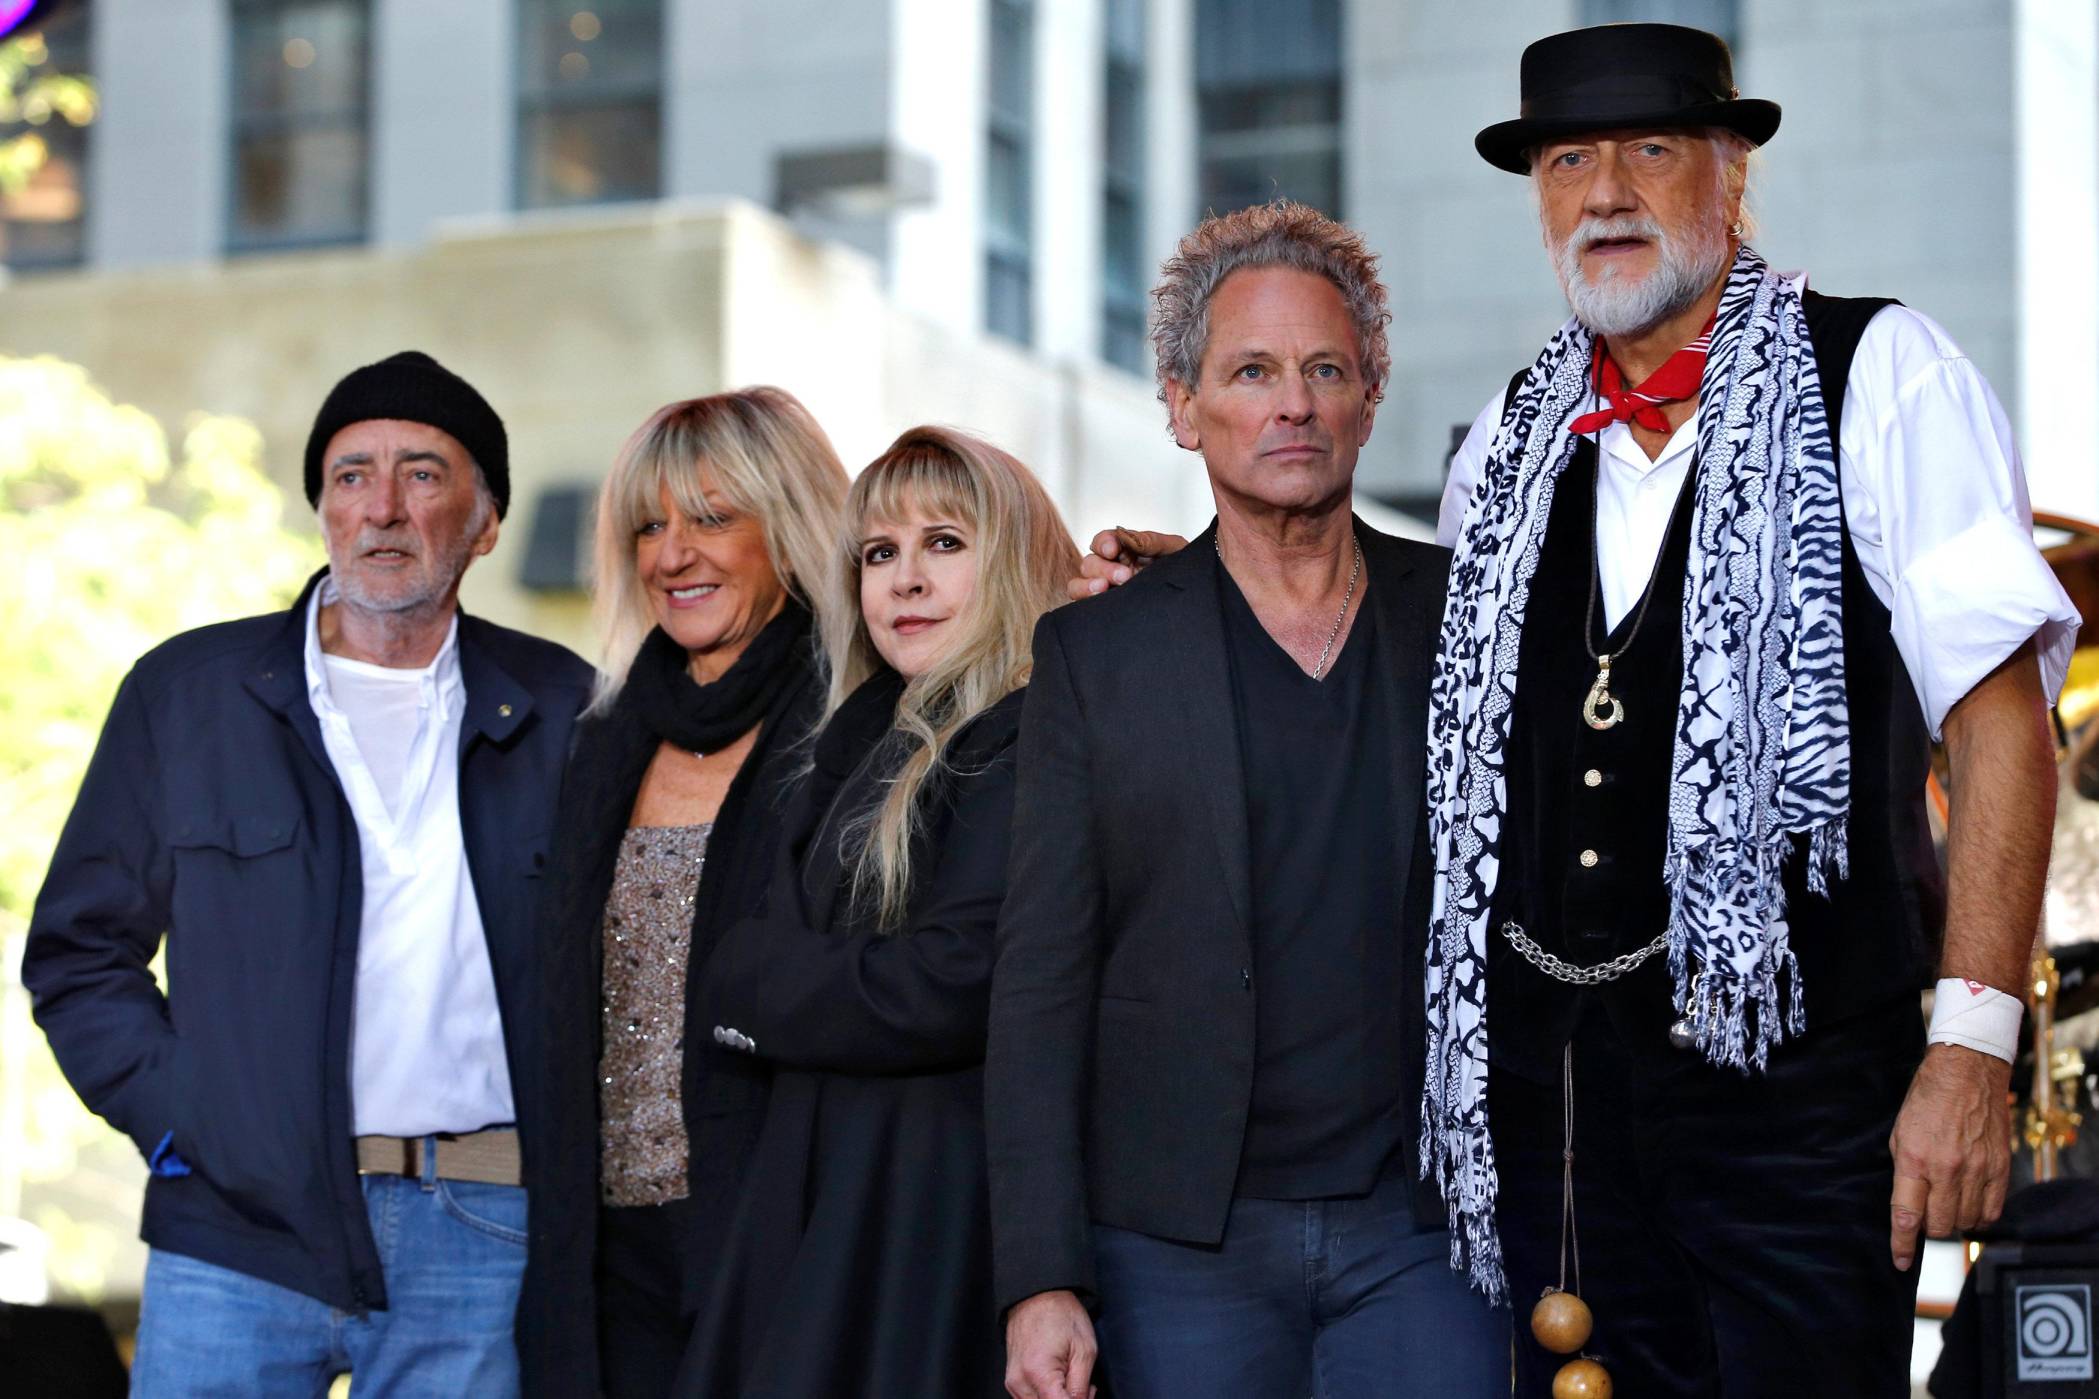 Why Lindsey Buckingham Was Fired From Fleetwood Mac?